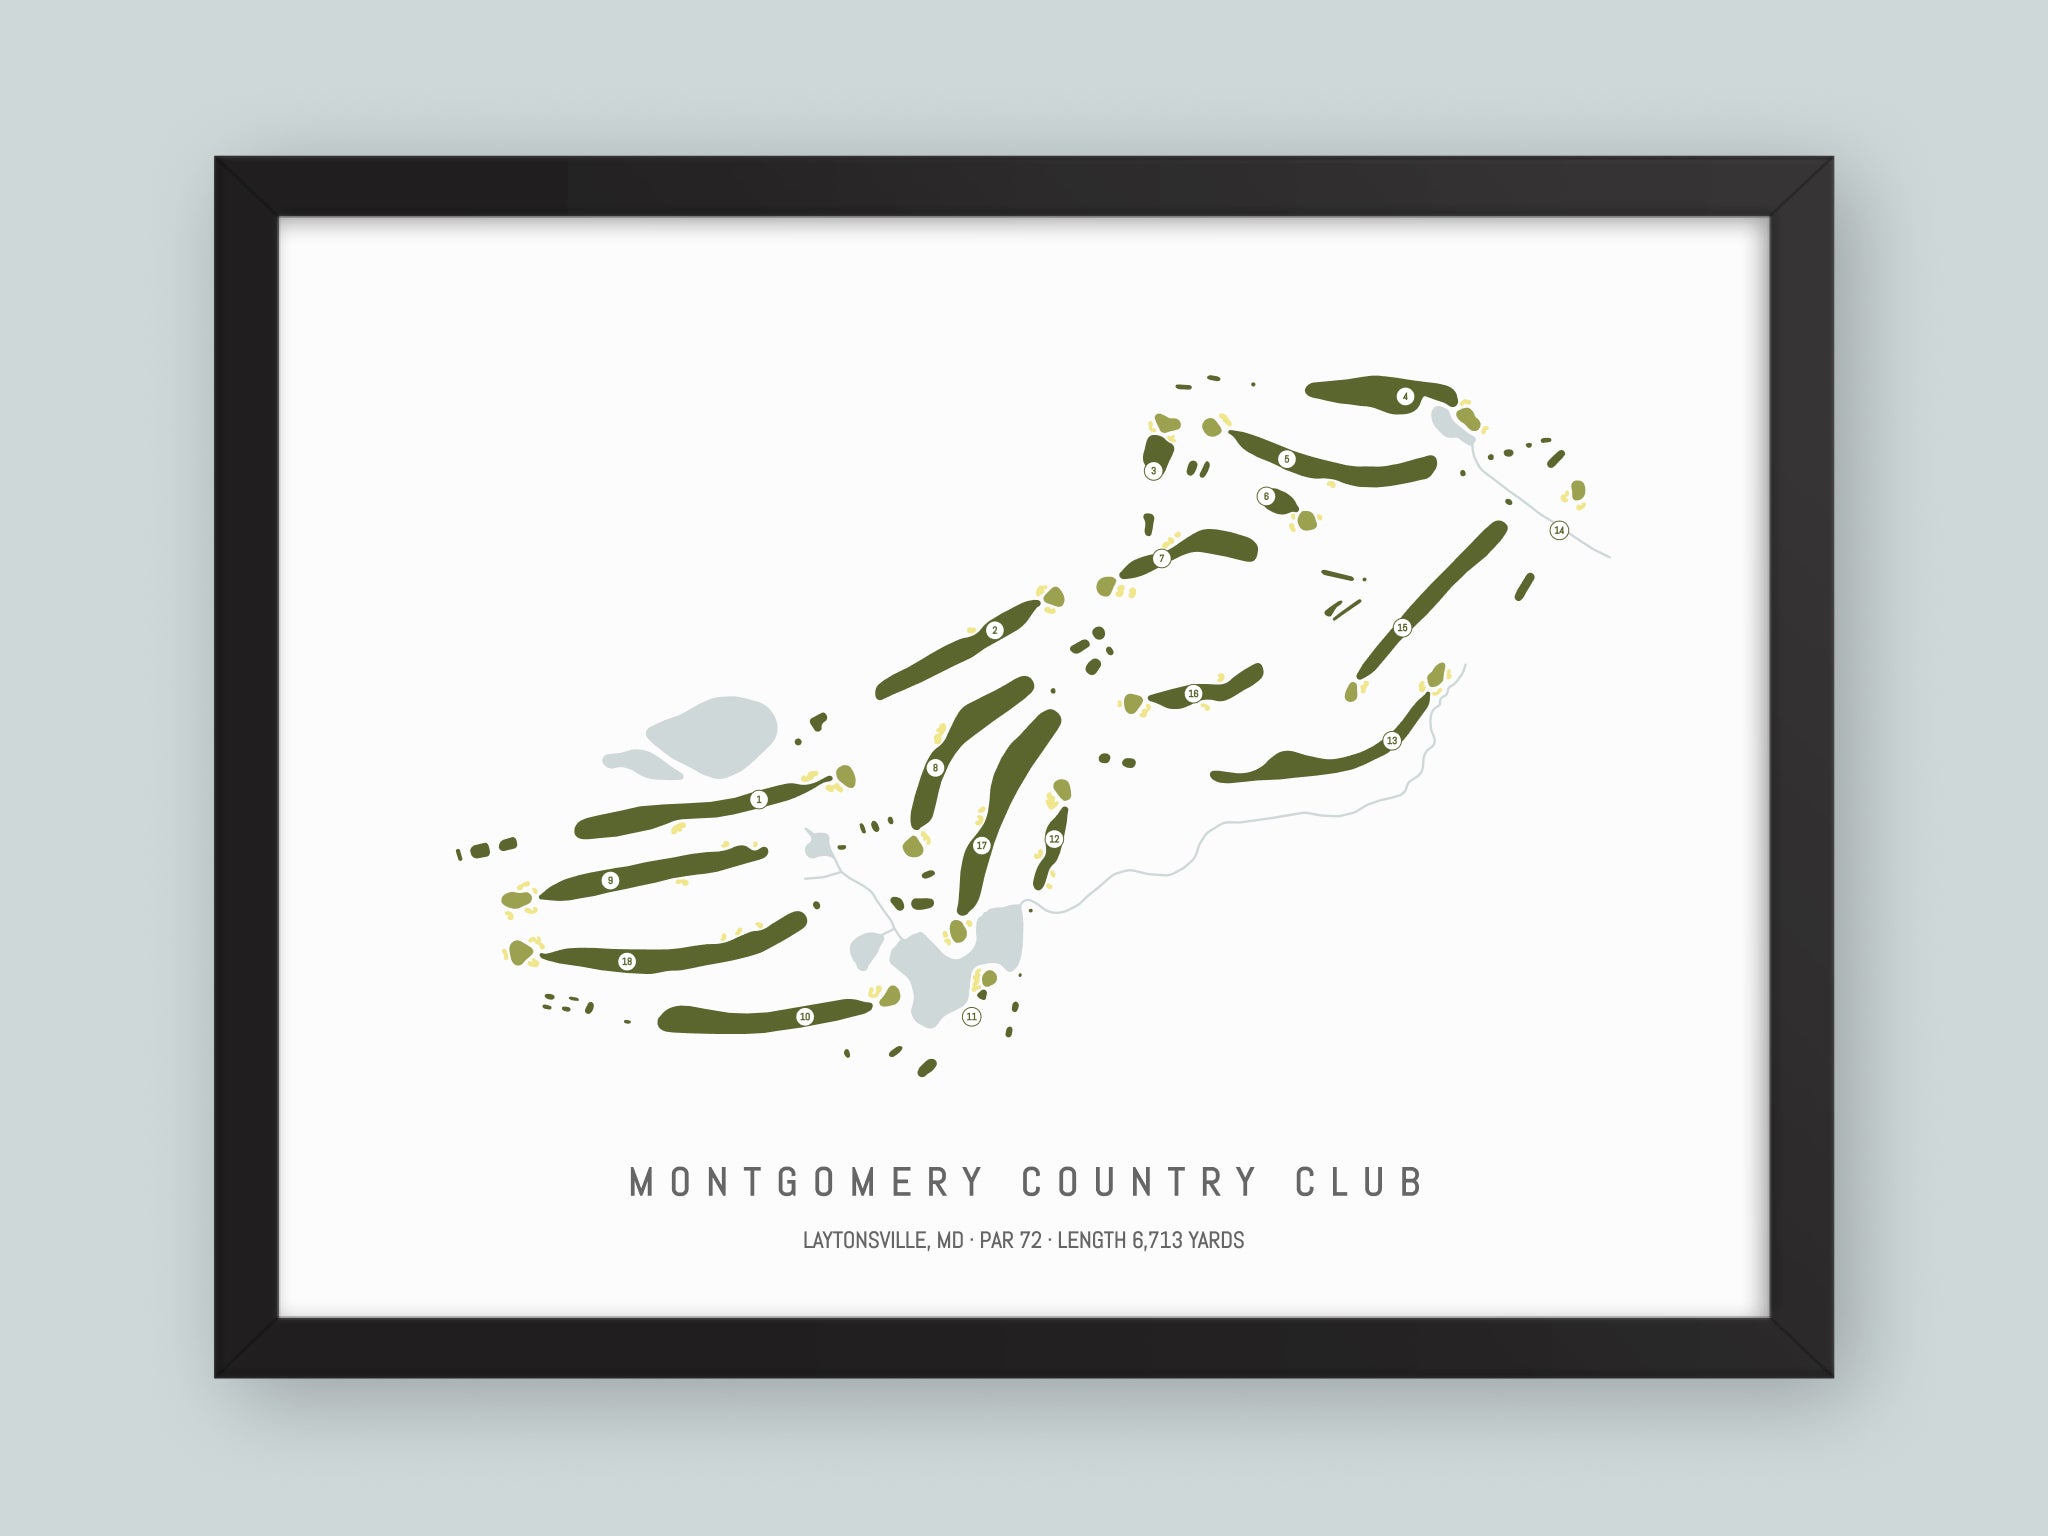 Montgomery-Country-Club-MD--Black-Frame-24x18-With-Hole-Numbers